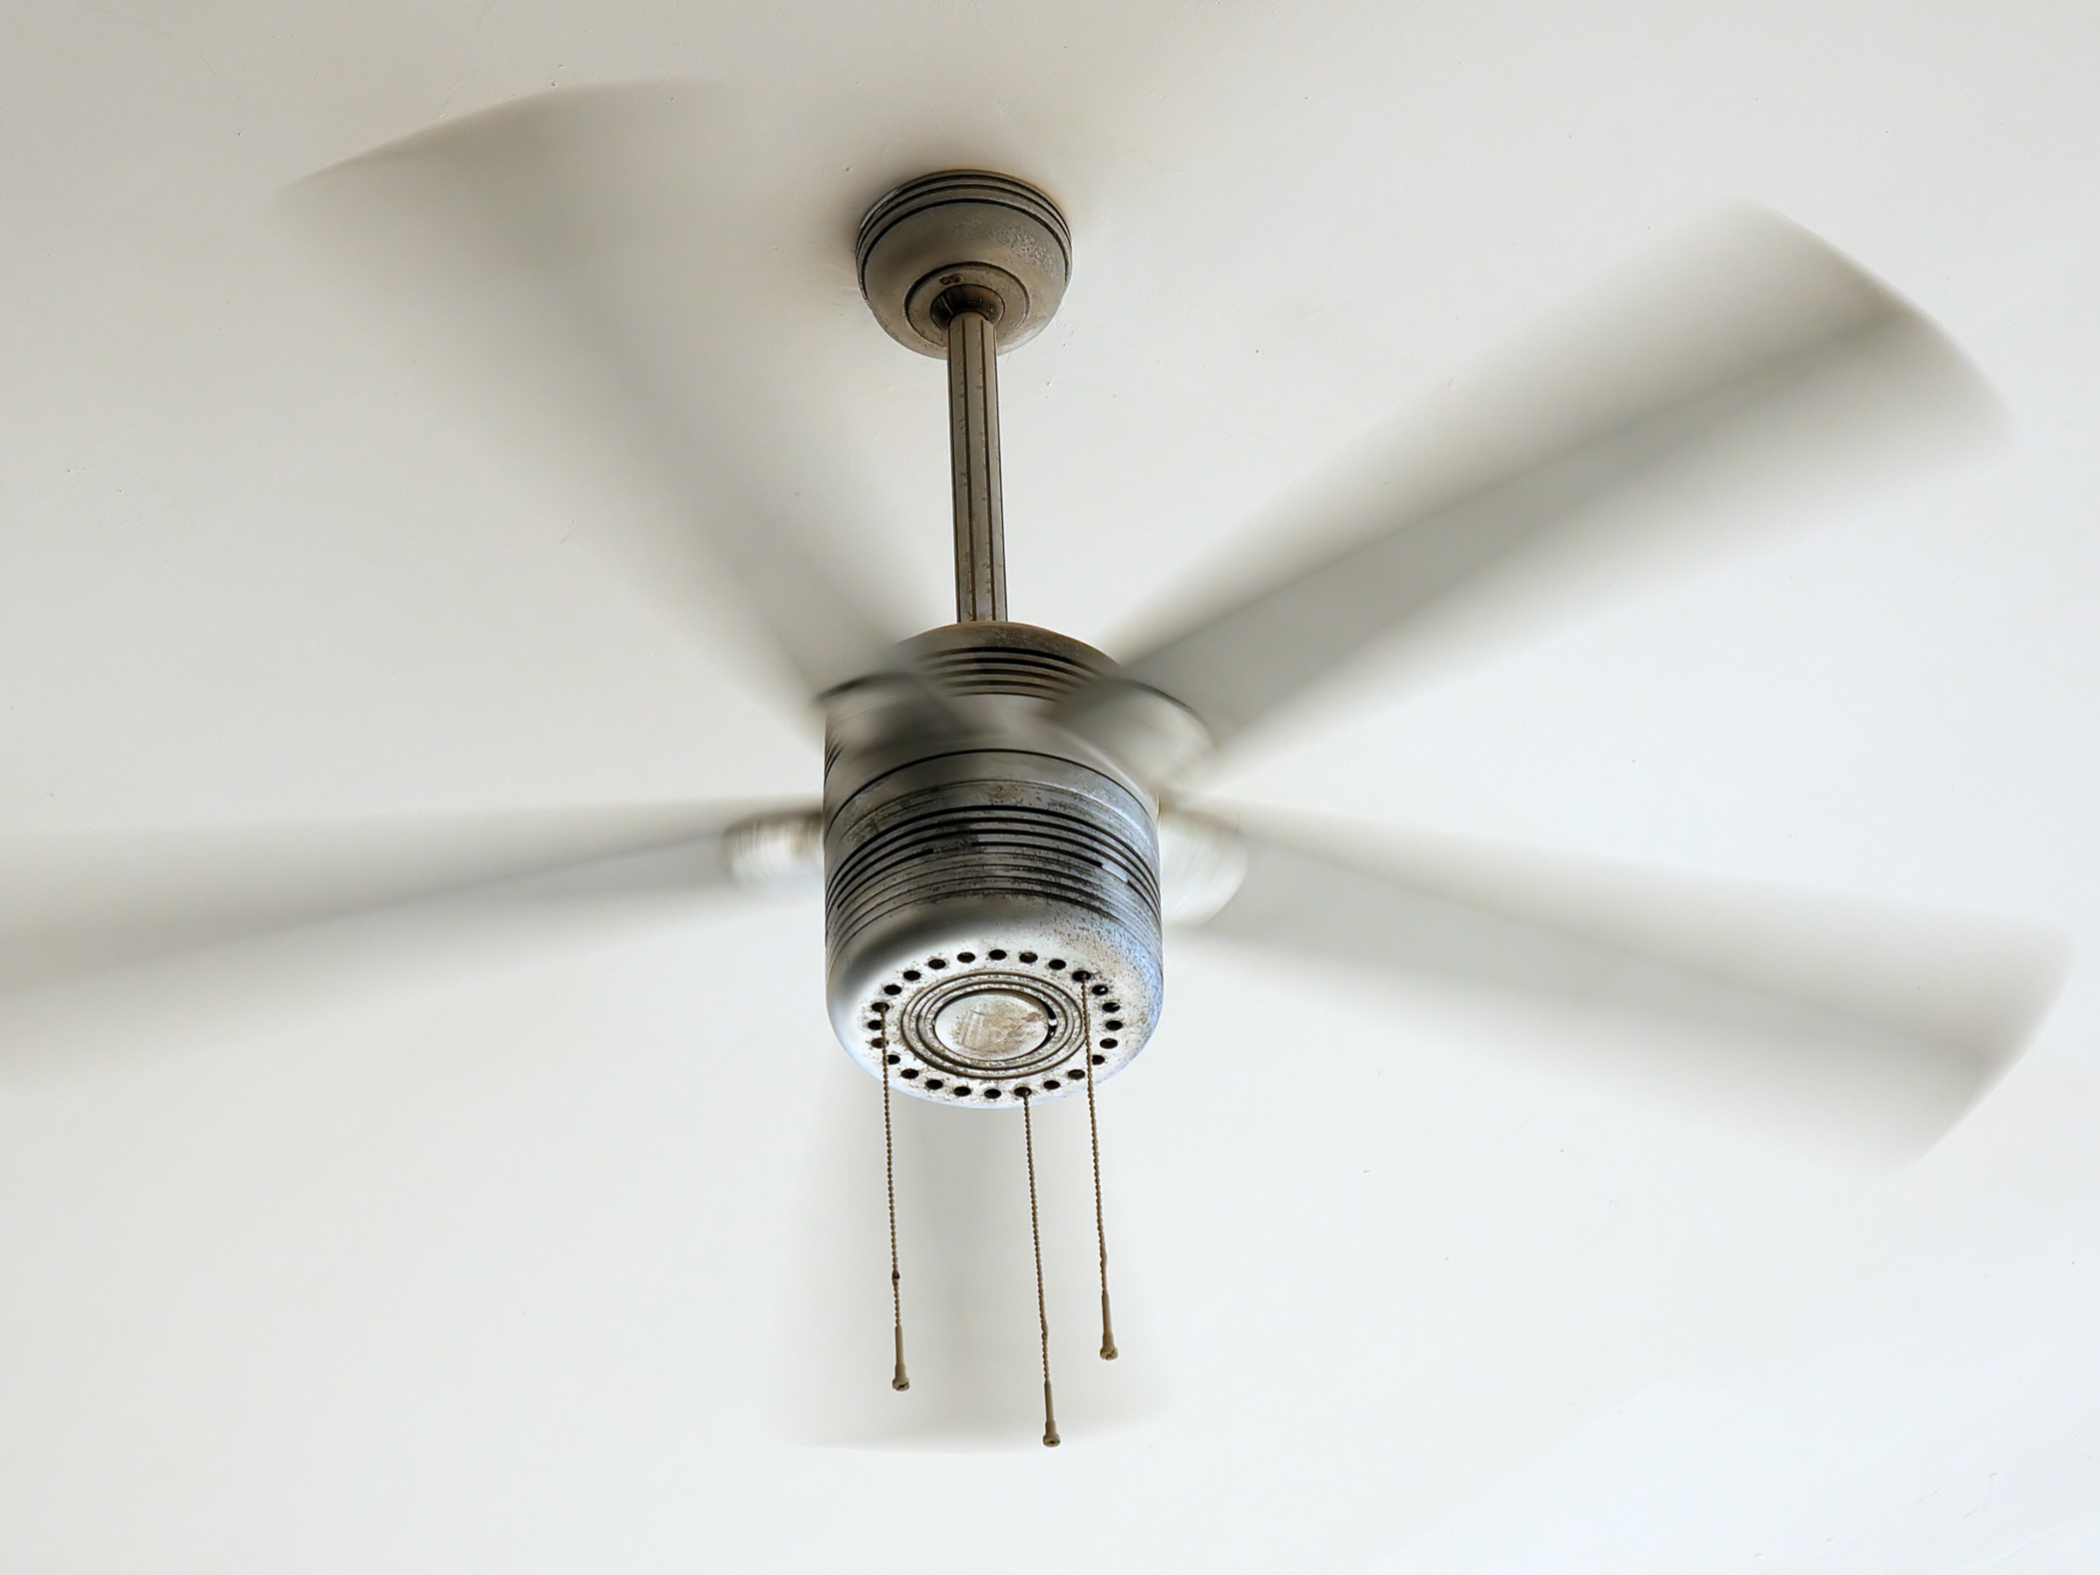 A vintage ceiling fan spinning